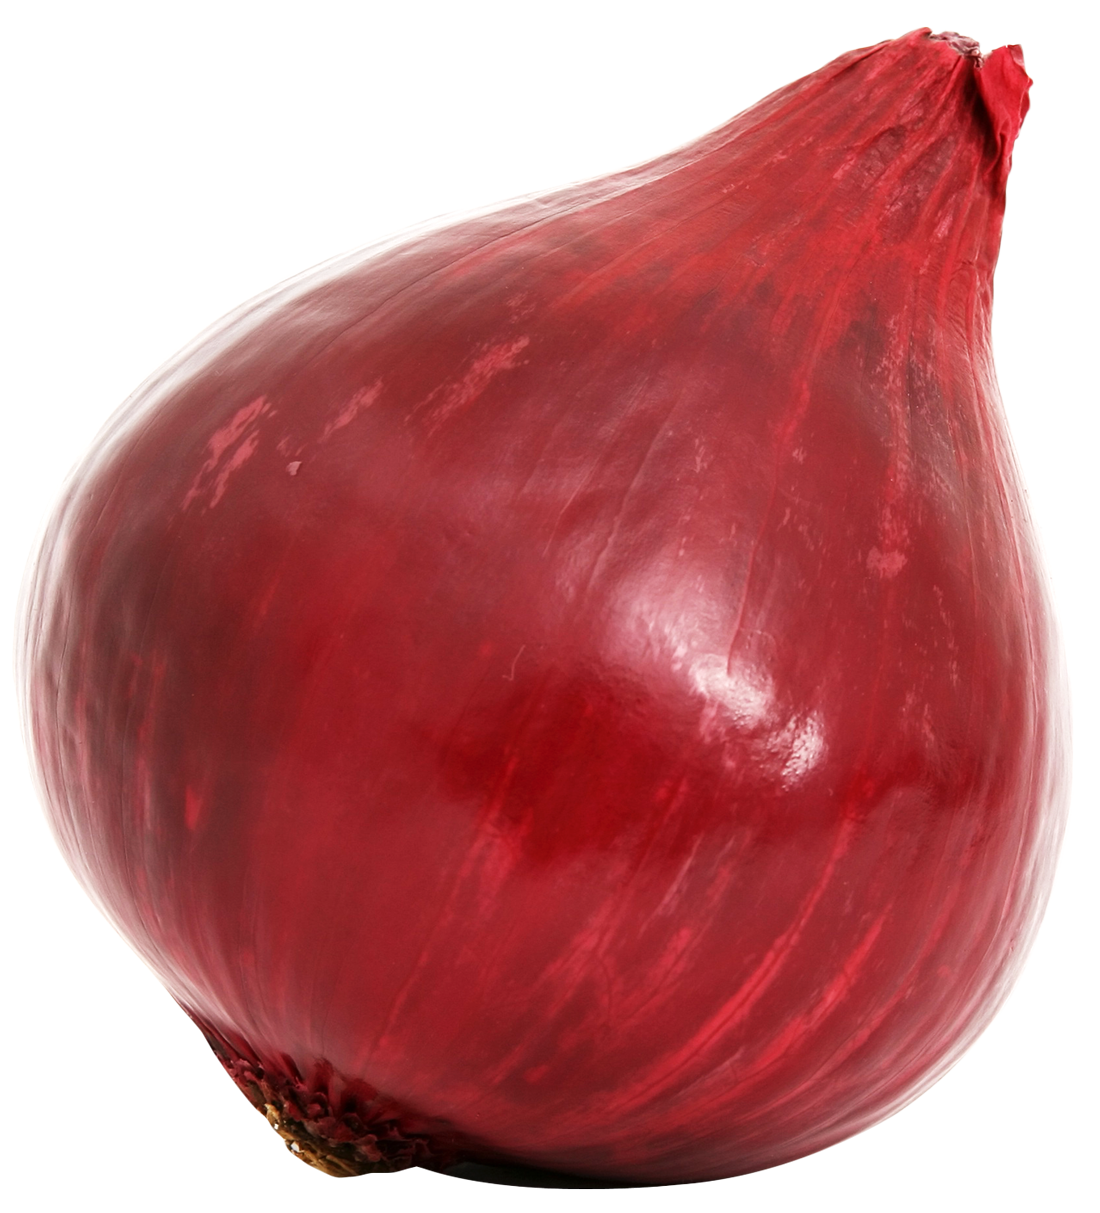 Red bulb png image. Onion clipart shallot